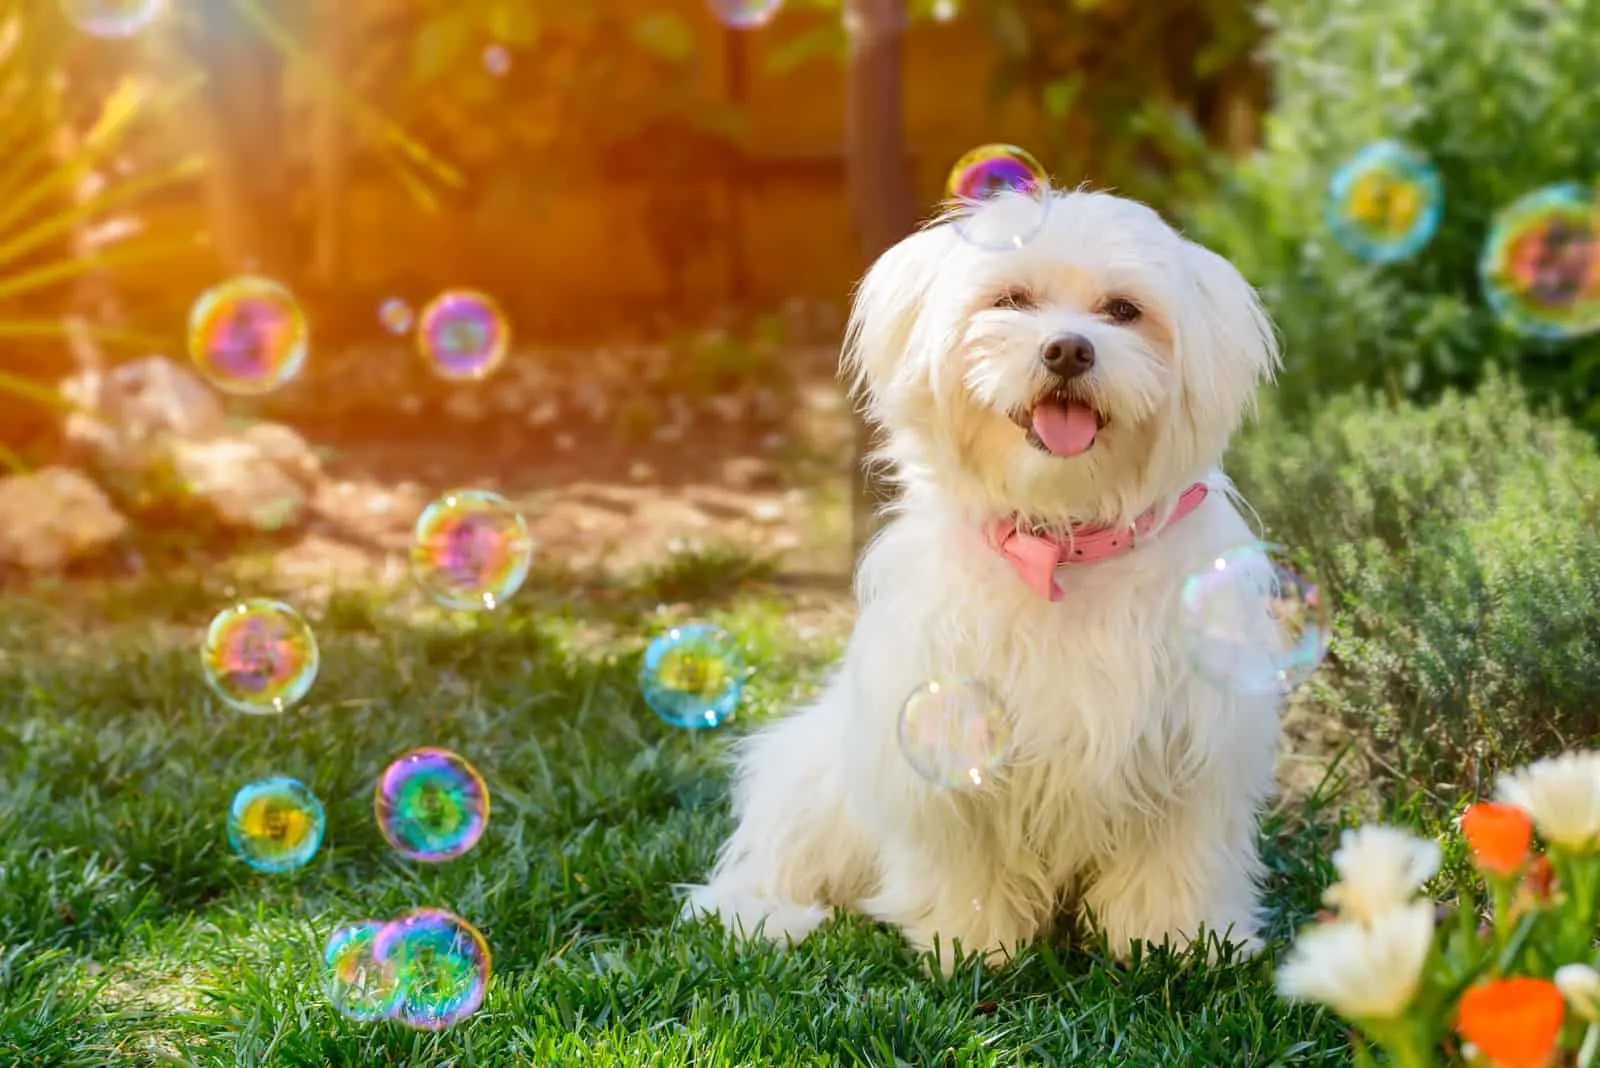 Maltese Puppy dog among Soap Bubbles in the Garden